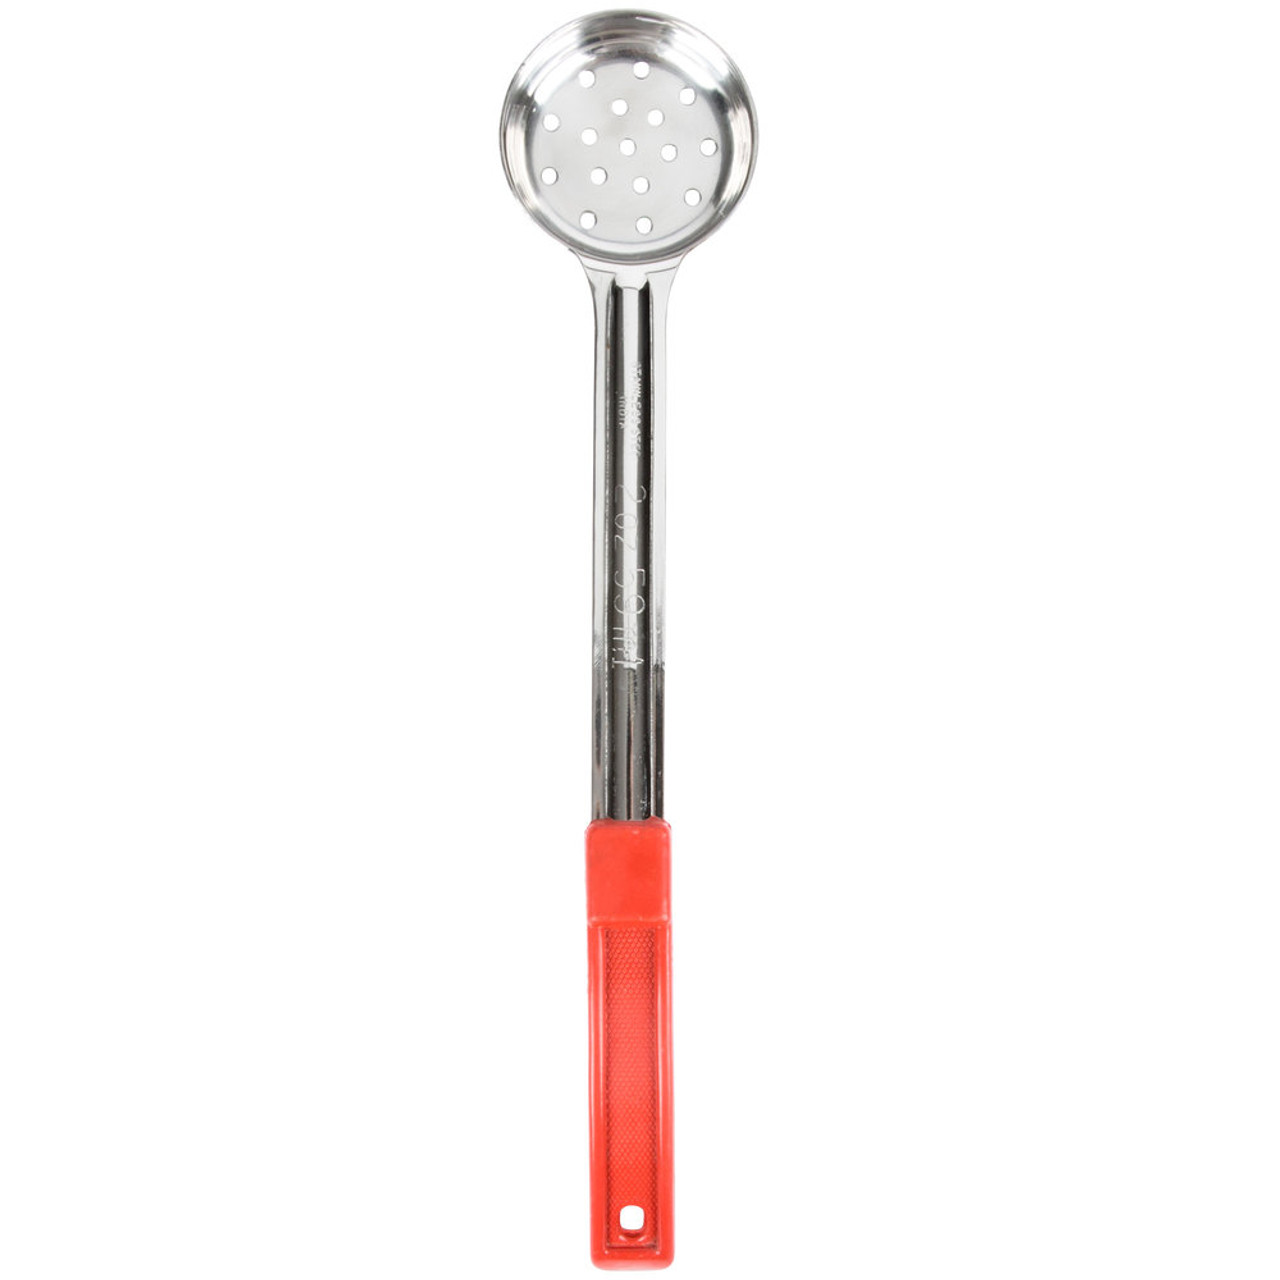 2 oz. One-Piece Perforated Portion Spoon